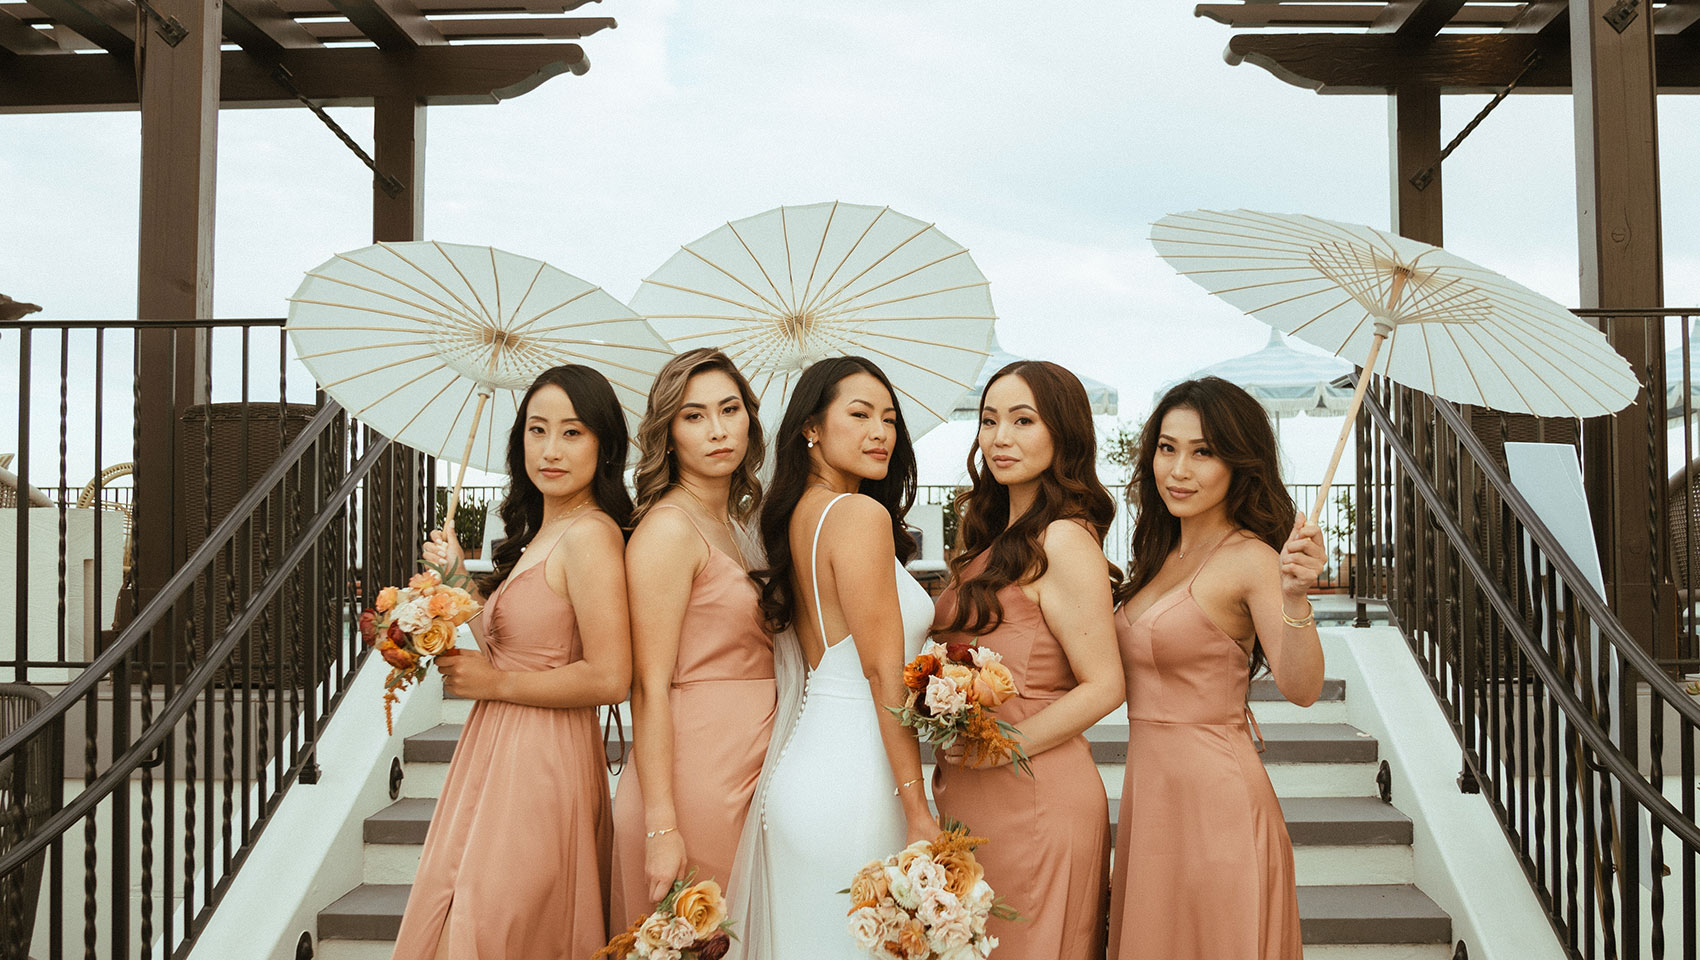 Mimi and her bridesmaids